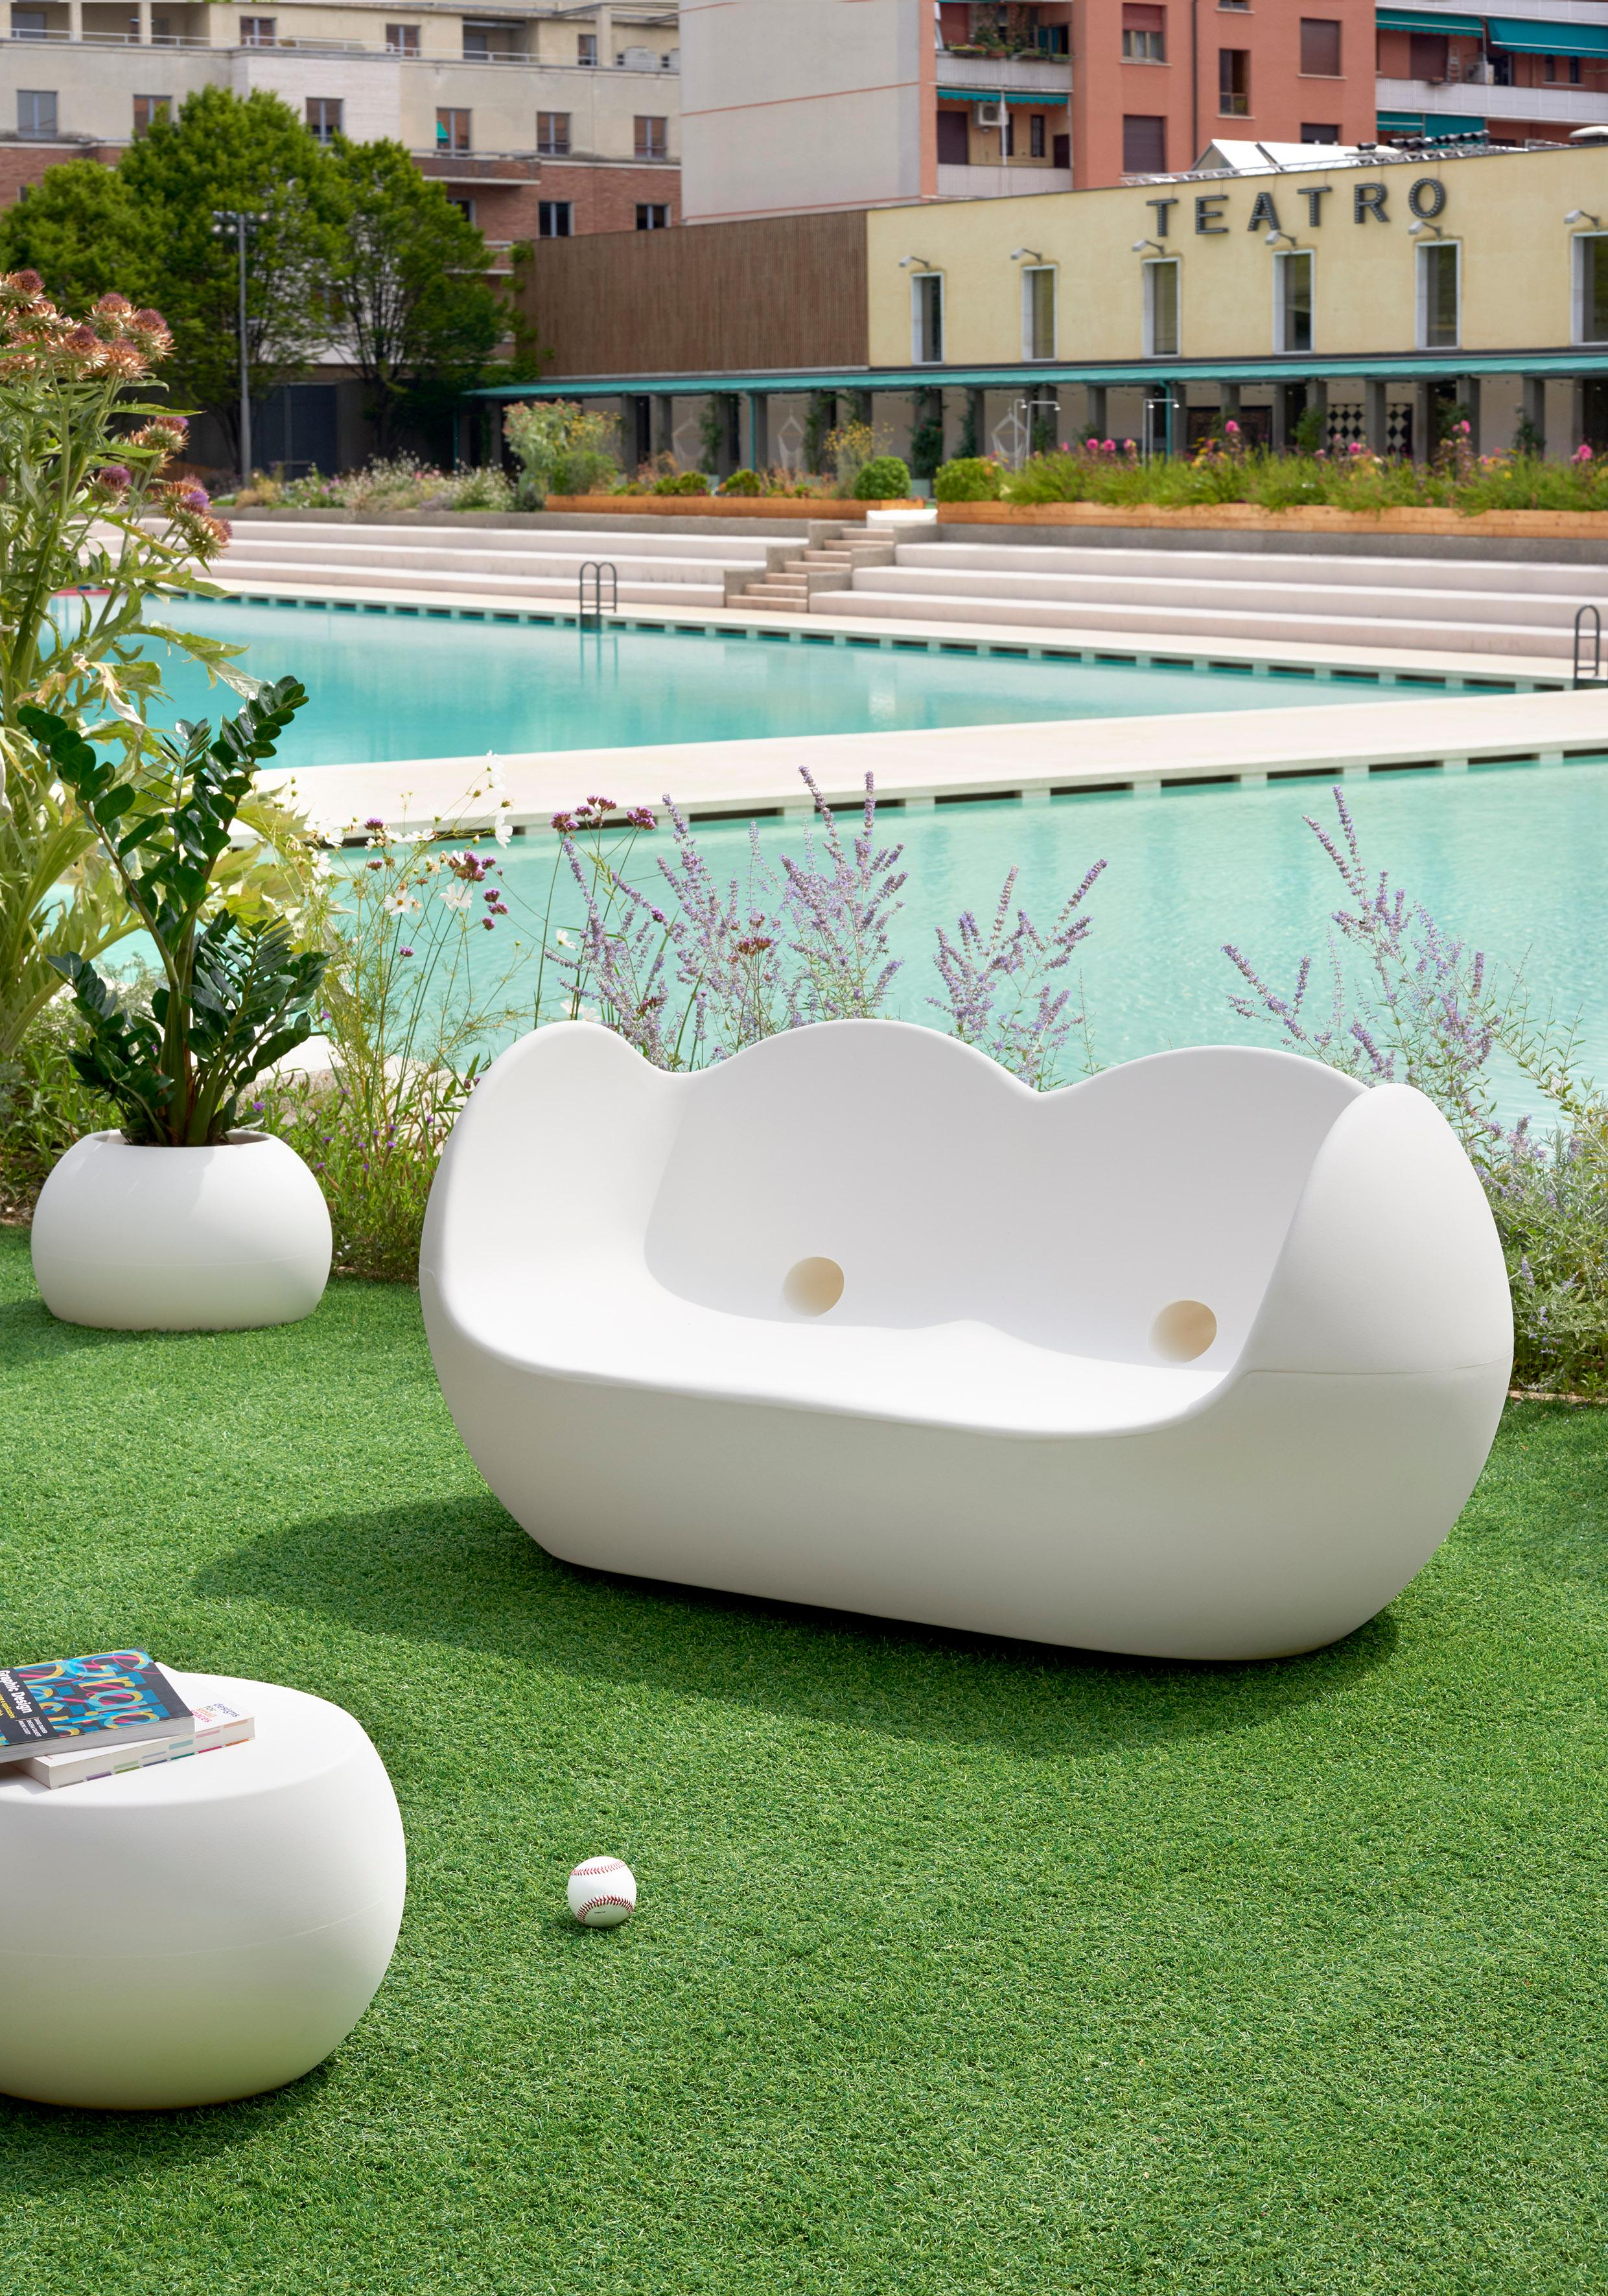 Malva Green Blossy Rocking Sofa by Karim Rashid
Dimensions: D 85 x W 159 x H 75 cm. Seat Height: 34 cm.
Materials: Polyethylene.
Weight: 38 kg.

Available in different color options. This product is suitable for indoor and outdoor use. Please